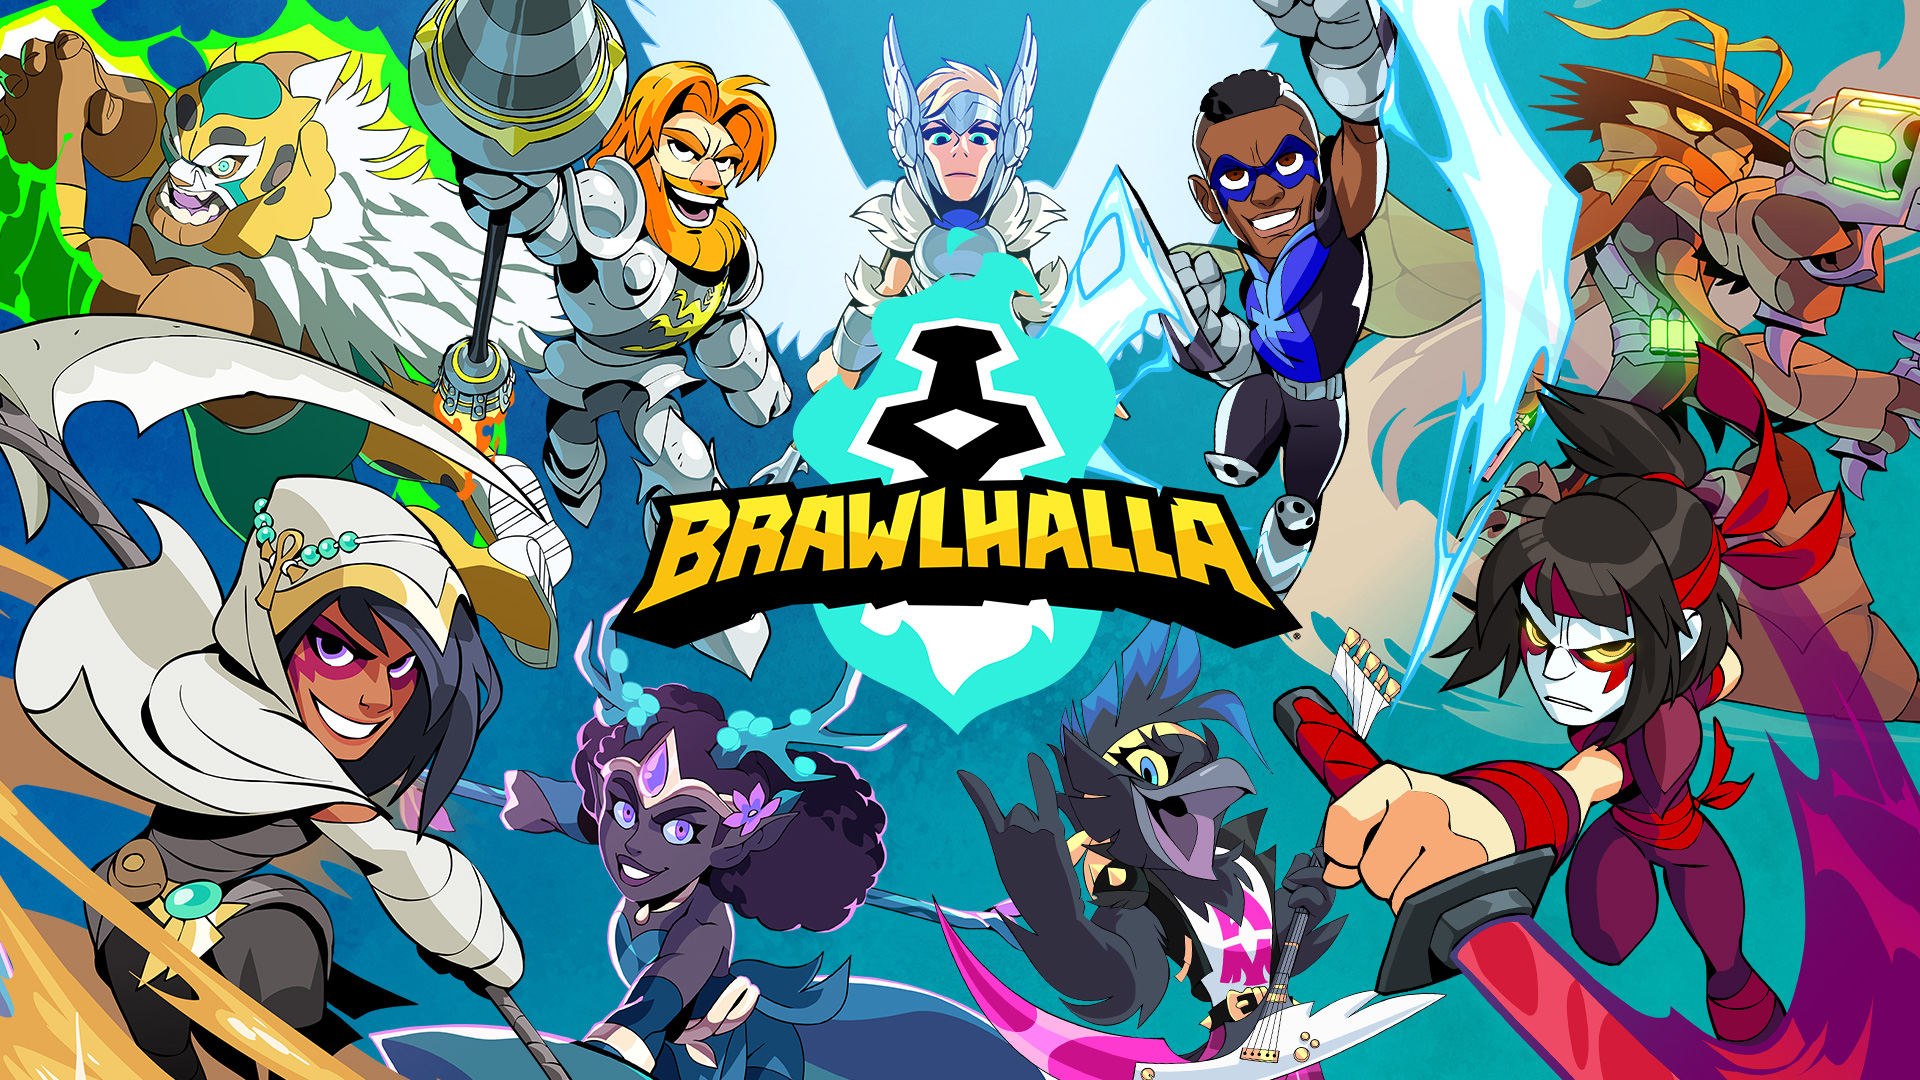 Check Out the Brawlhalla Patch 7.11 Balance Preview